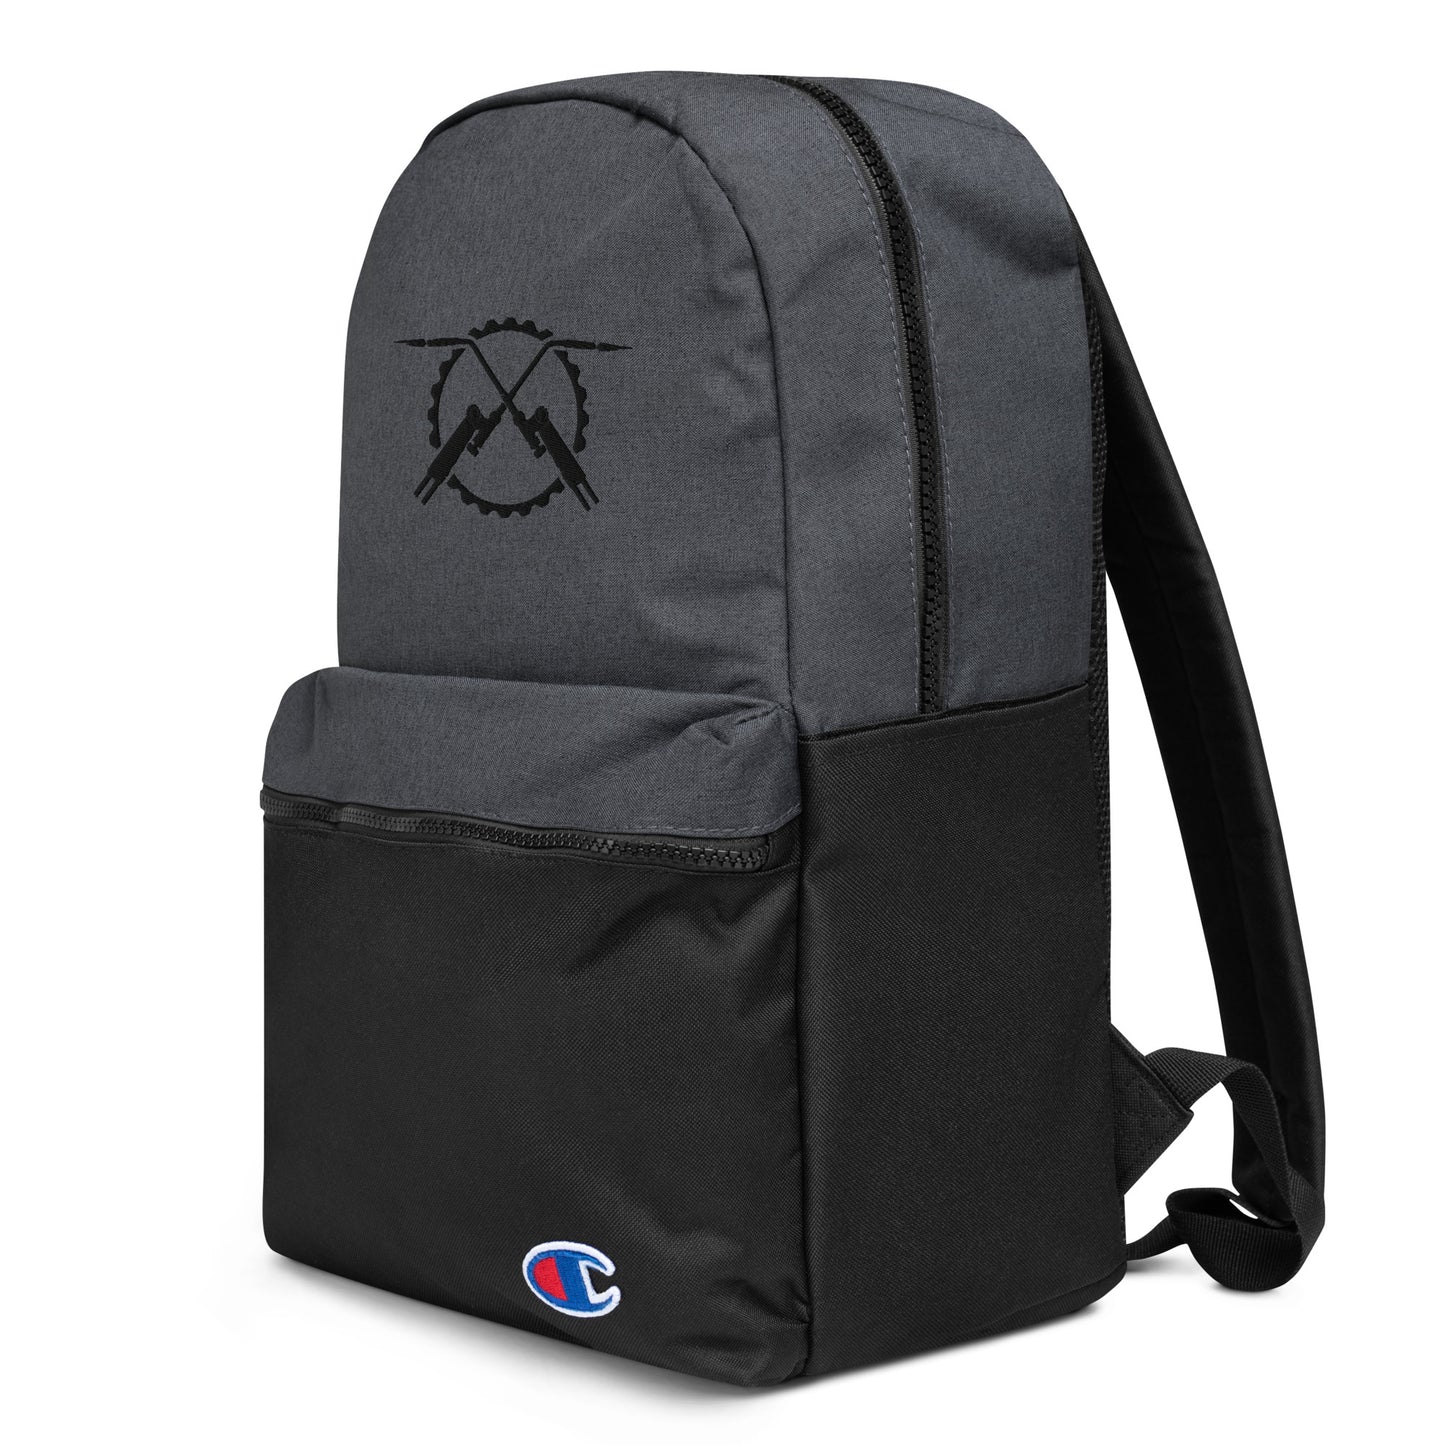 Torched Water-Resistant Backpack